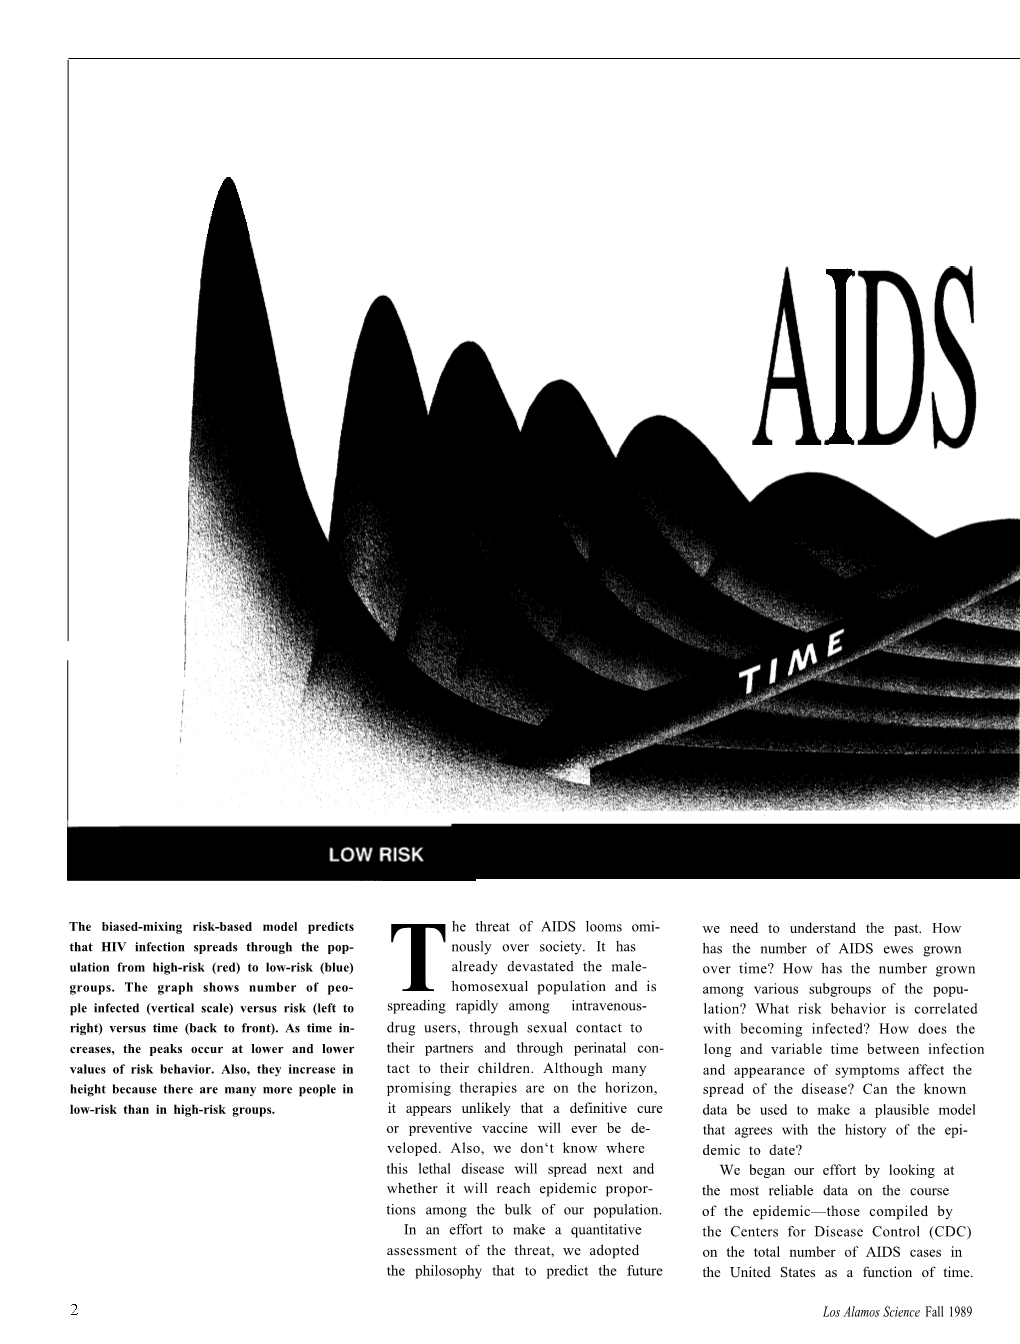 AIDS and a Risk-Based Model